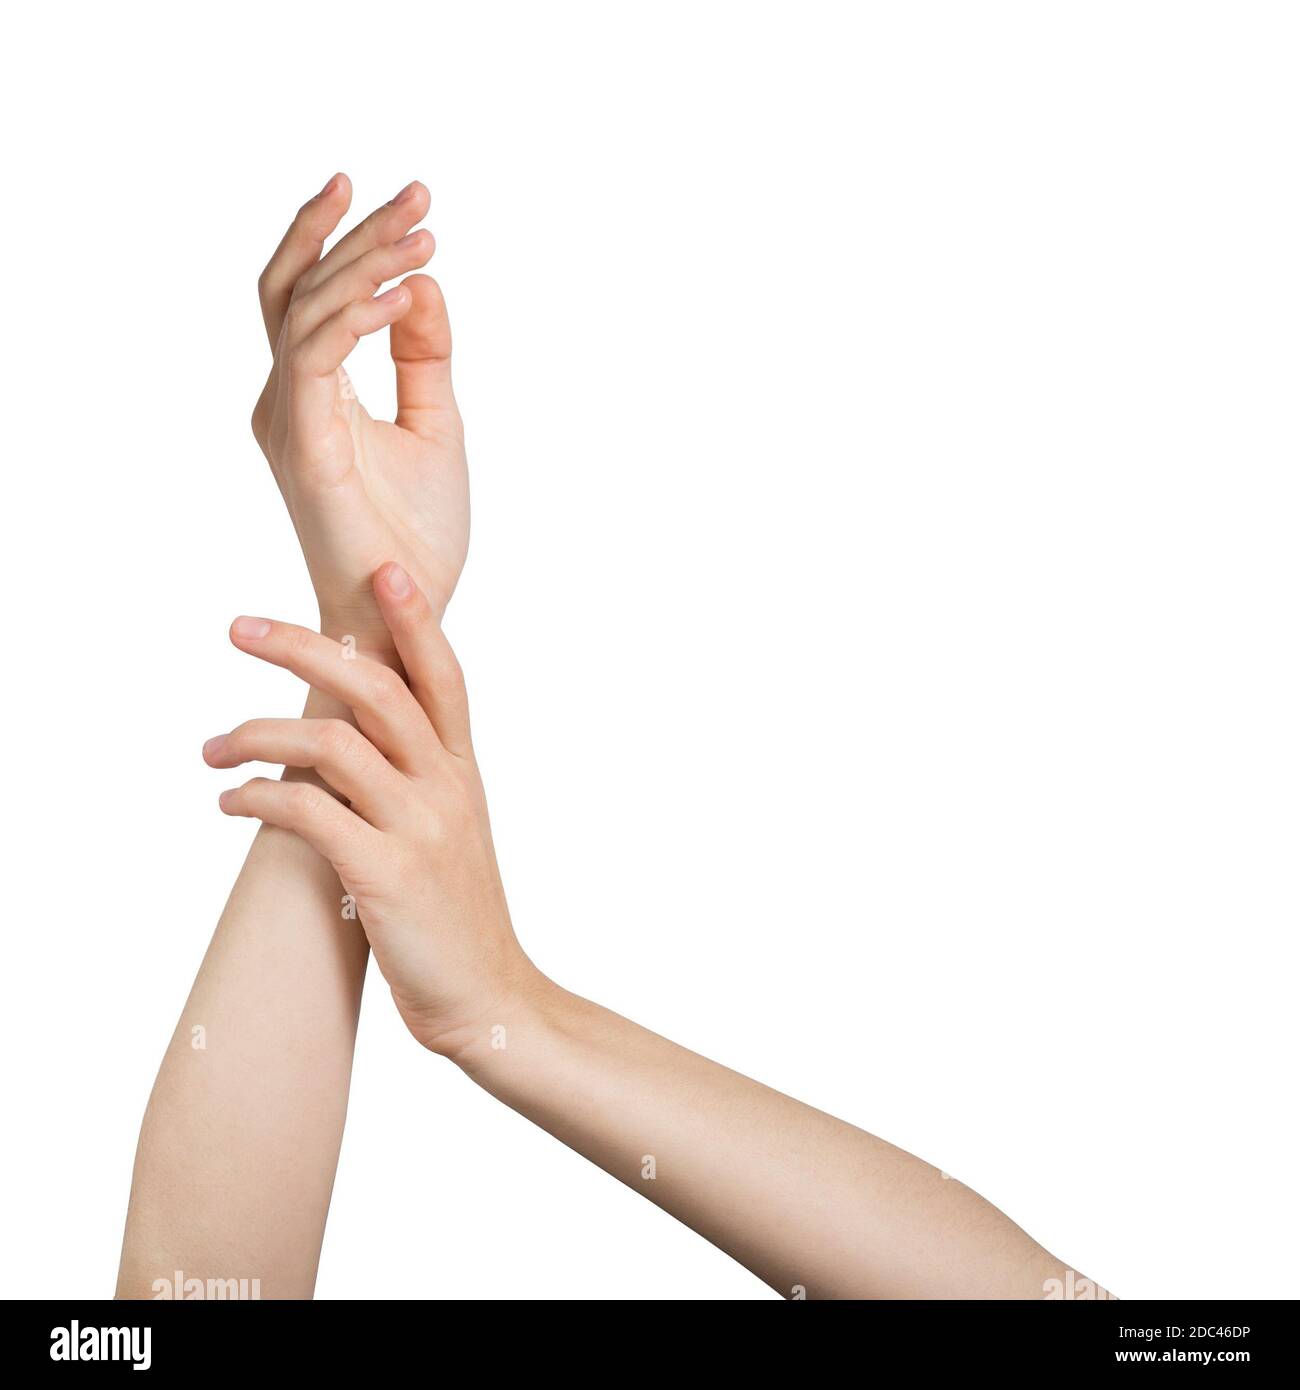 Caucasian woman hands holding each other isolated beauty template Stock Photo